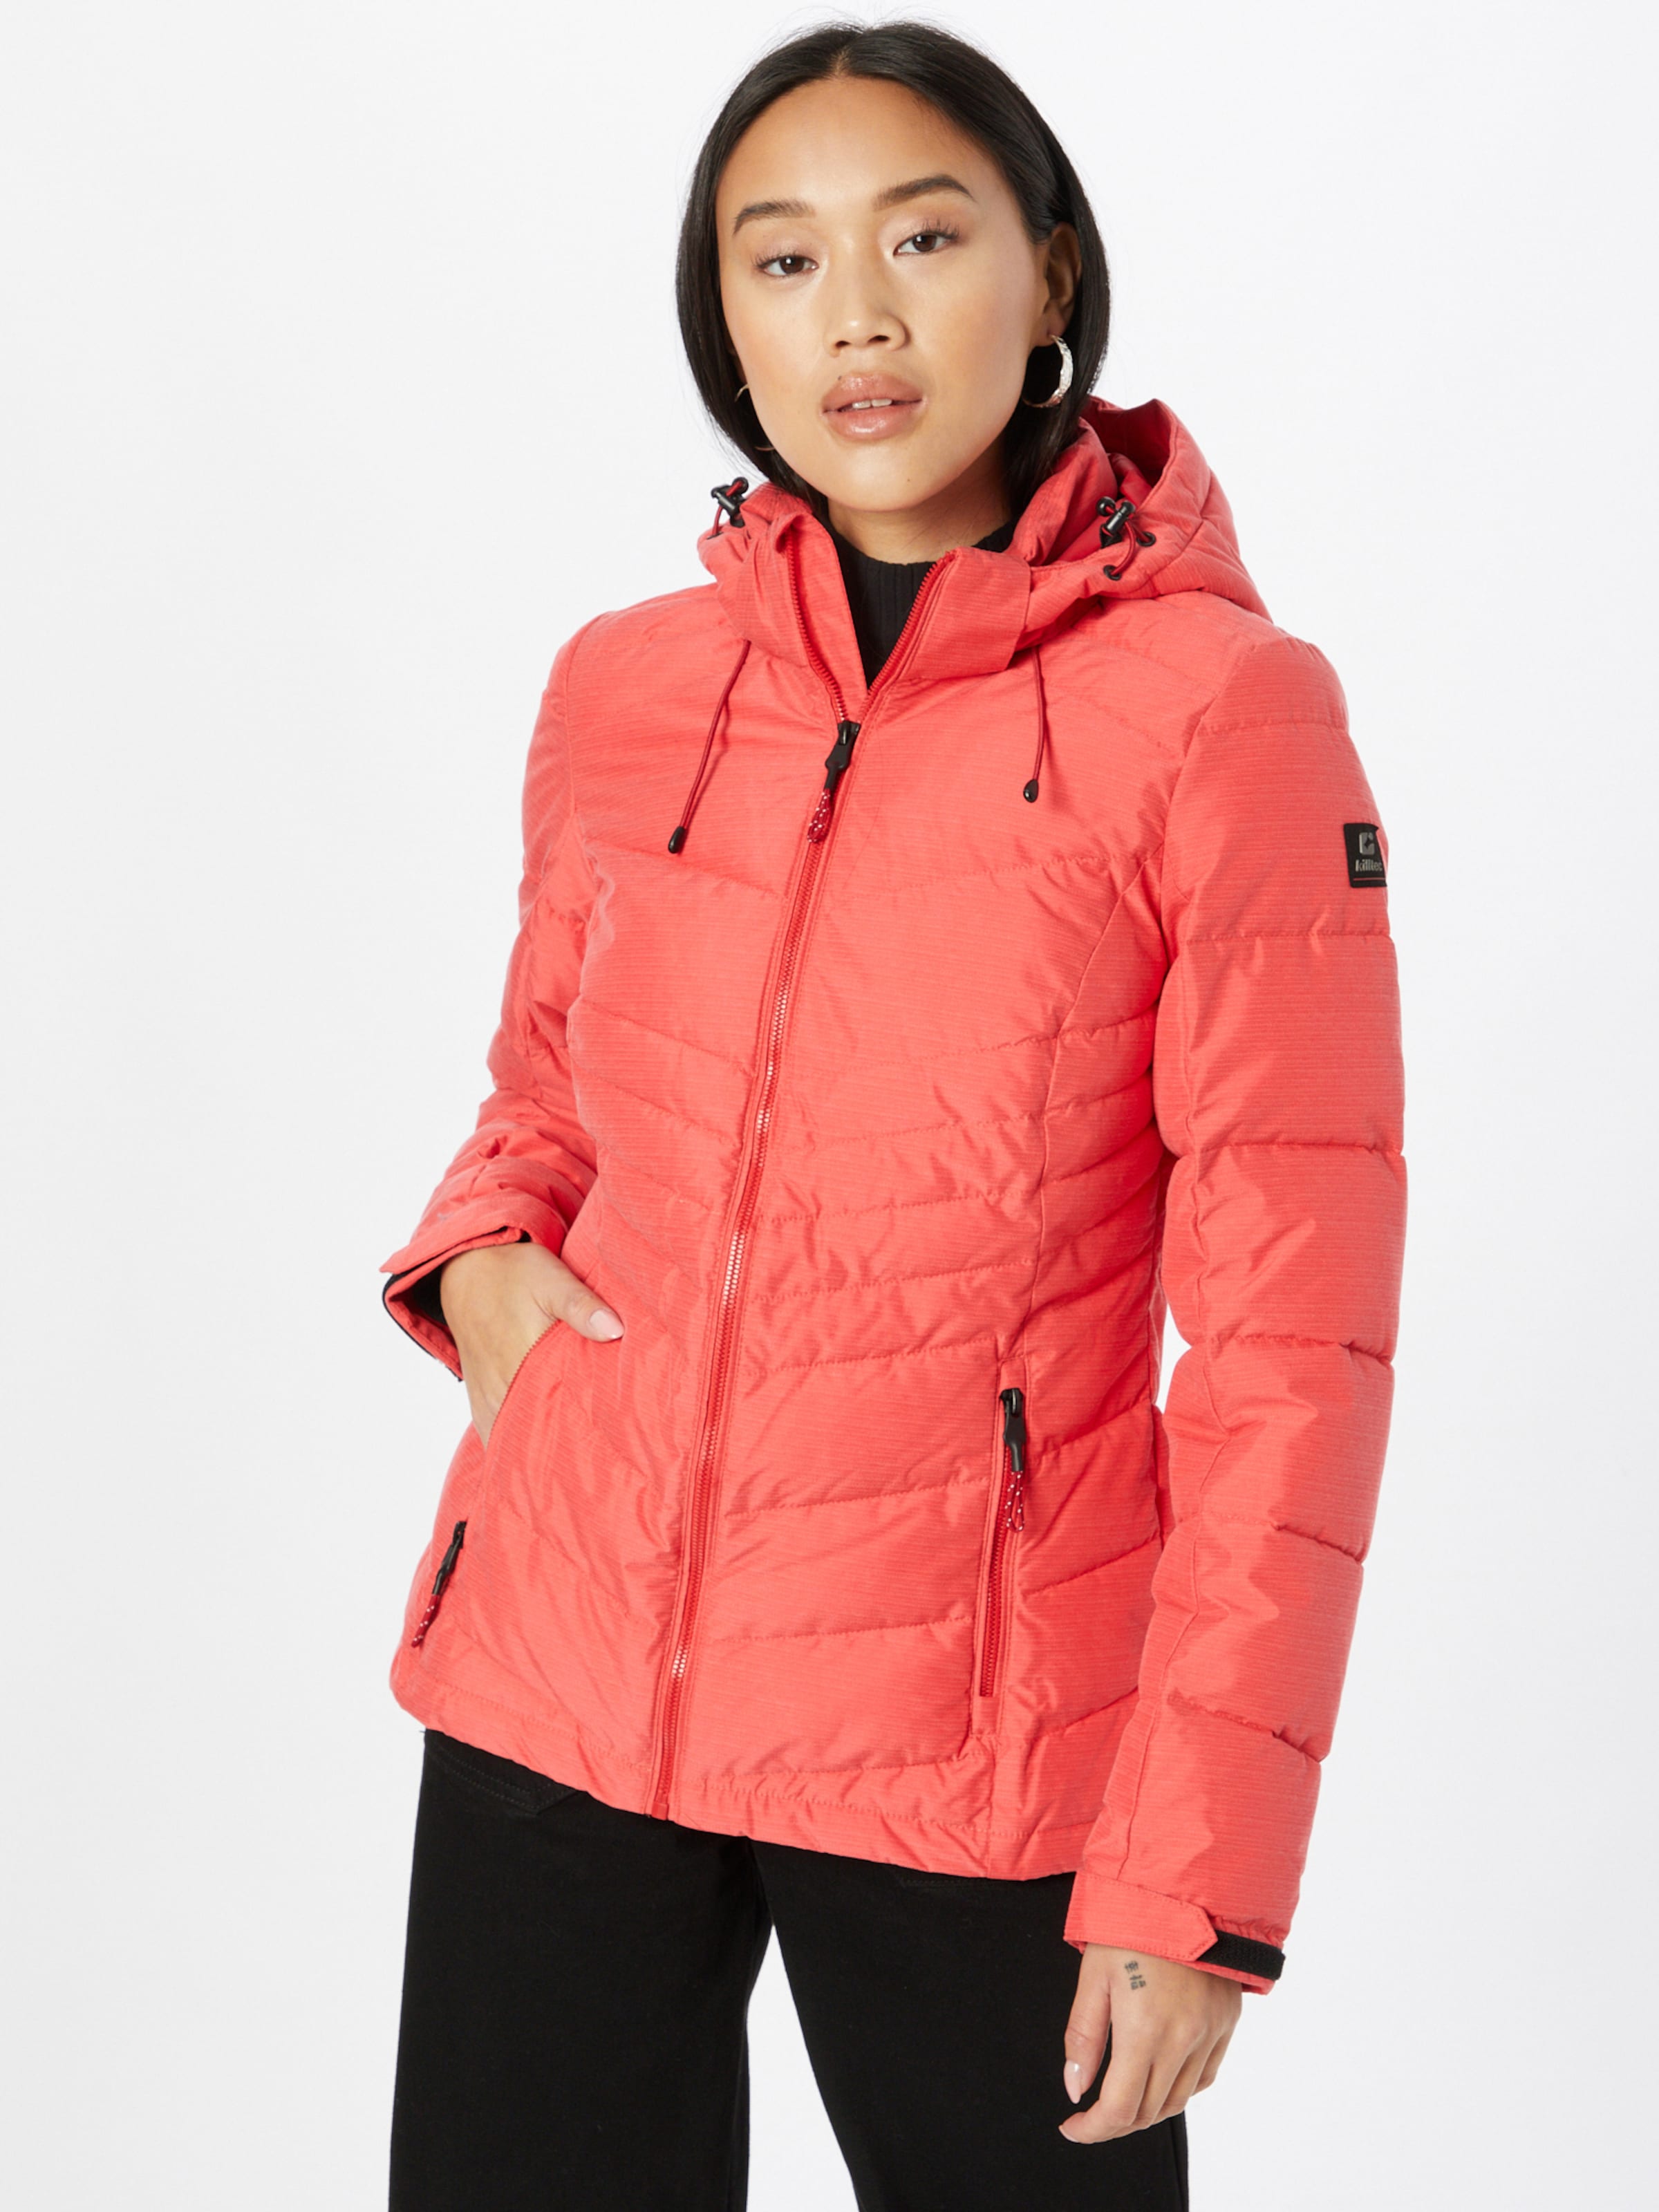 Outdoor Jacket in | KILLTEC Red ABOUT Pastel YOU